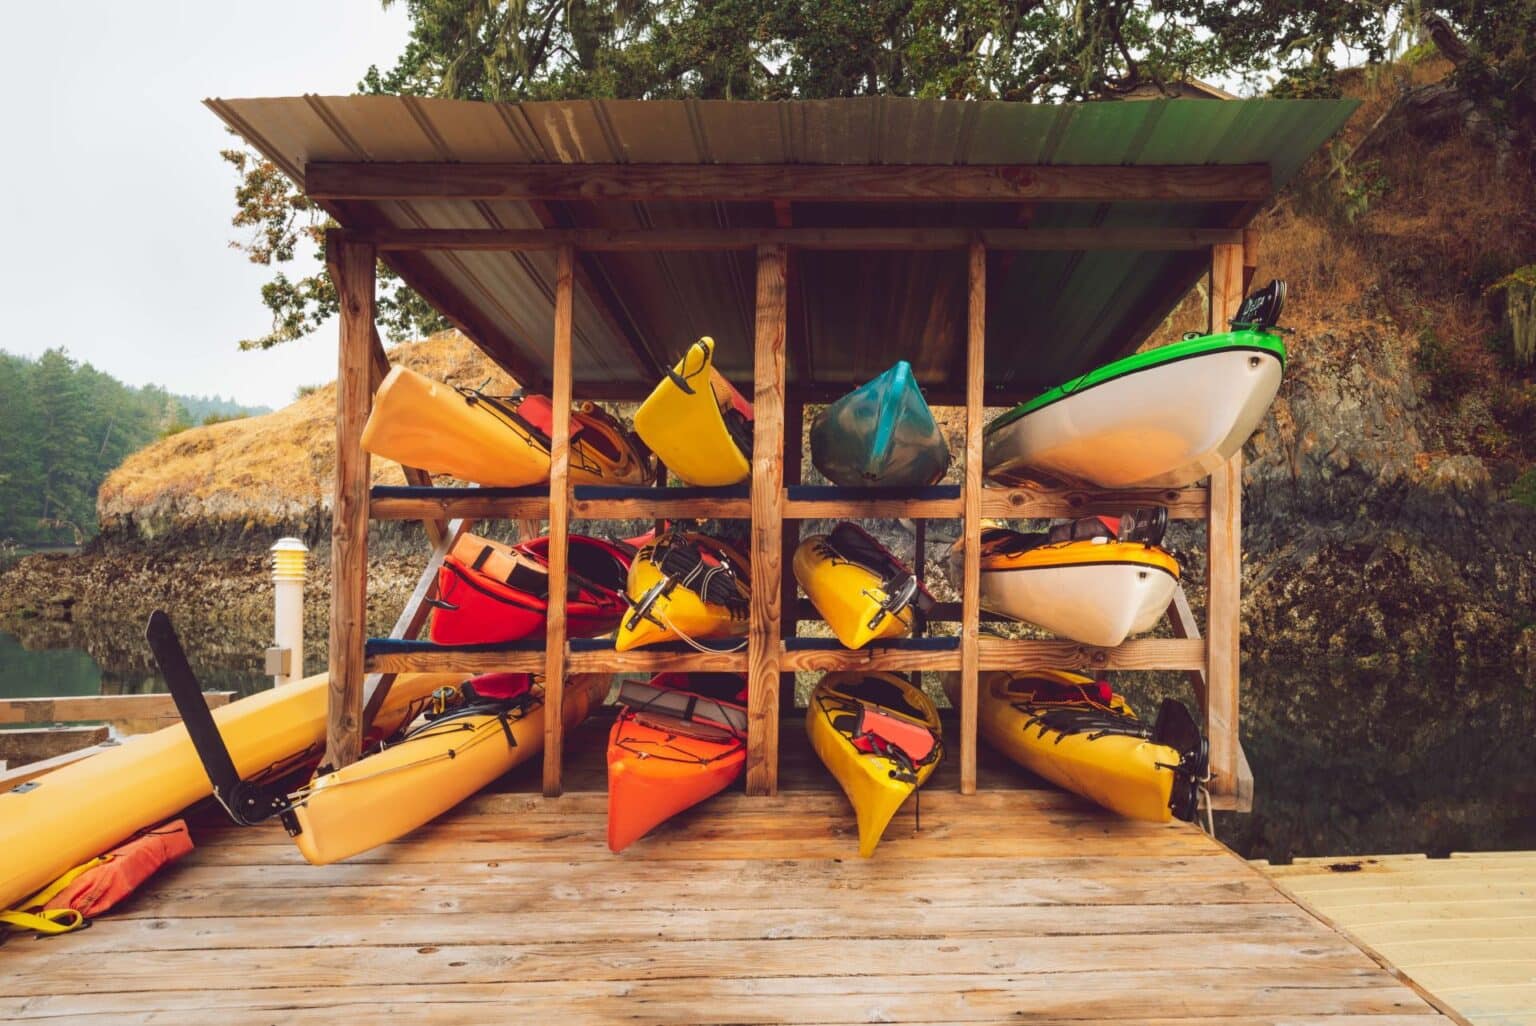 Collection of kayaks organized in a wooden kayak storage unit